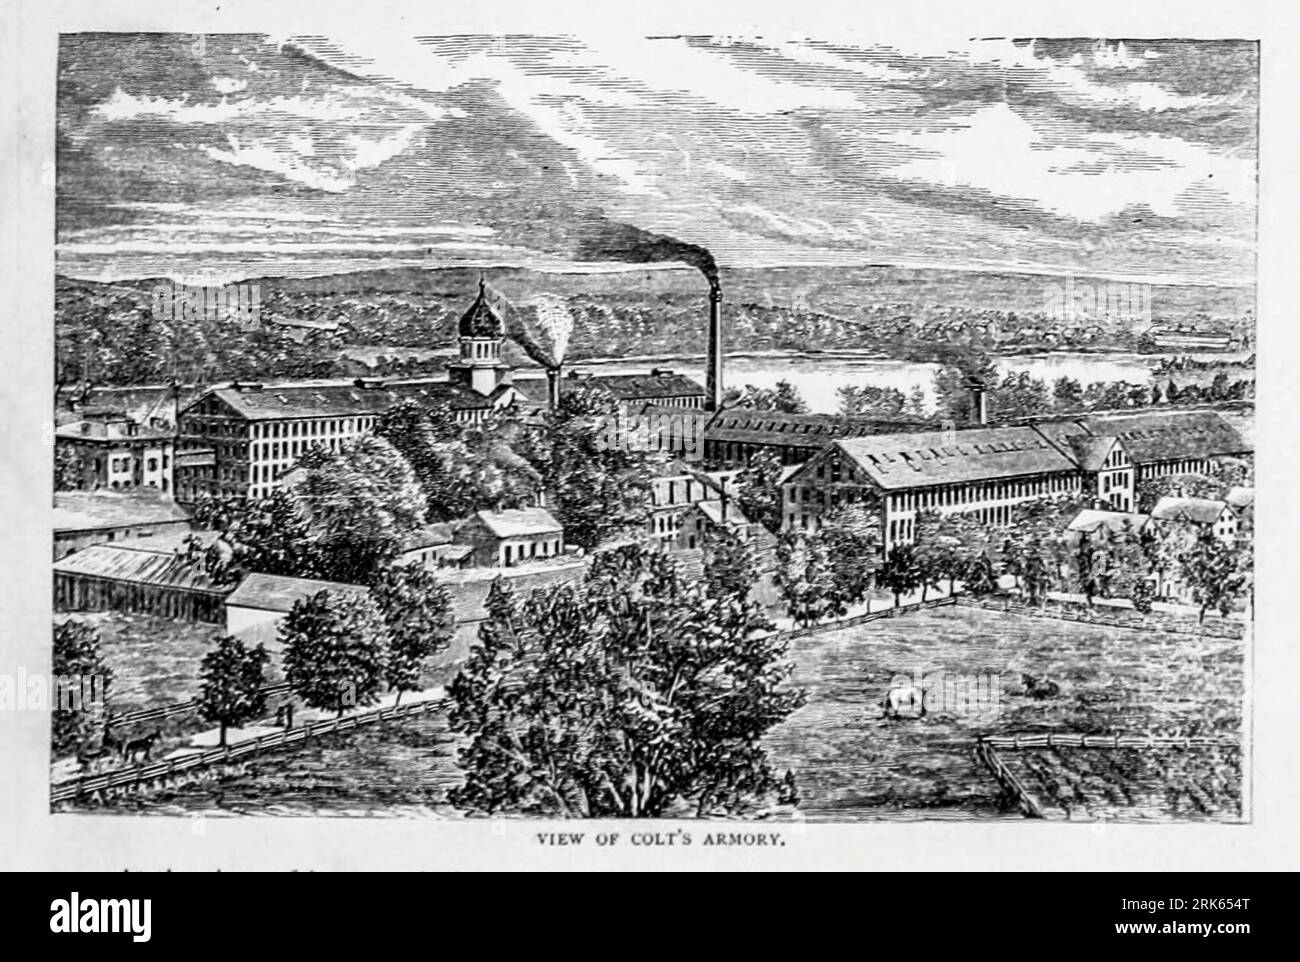 View of COLT'S ARMORY, HARTFORD, Connecticut from the Article MODERN MACHINE-SHOP ECONOMICS PRIME REQUISITES OF SHOP CONSTRUCTION By Horace L. Arnold from The Engineering Magazine DEVOTED TO INDUSTRIAL PROGRESS Volume XI October 1896 NEW YORK The Engineering Magazine Co Stock Photo